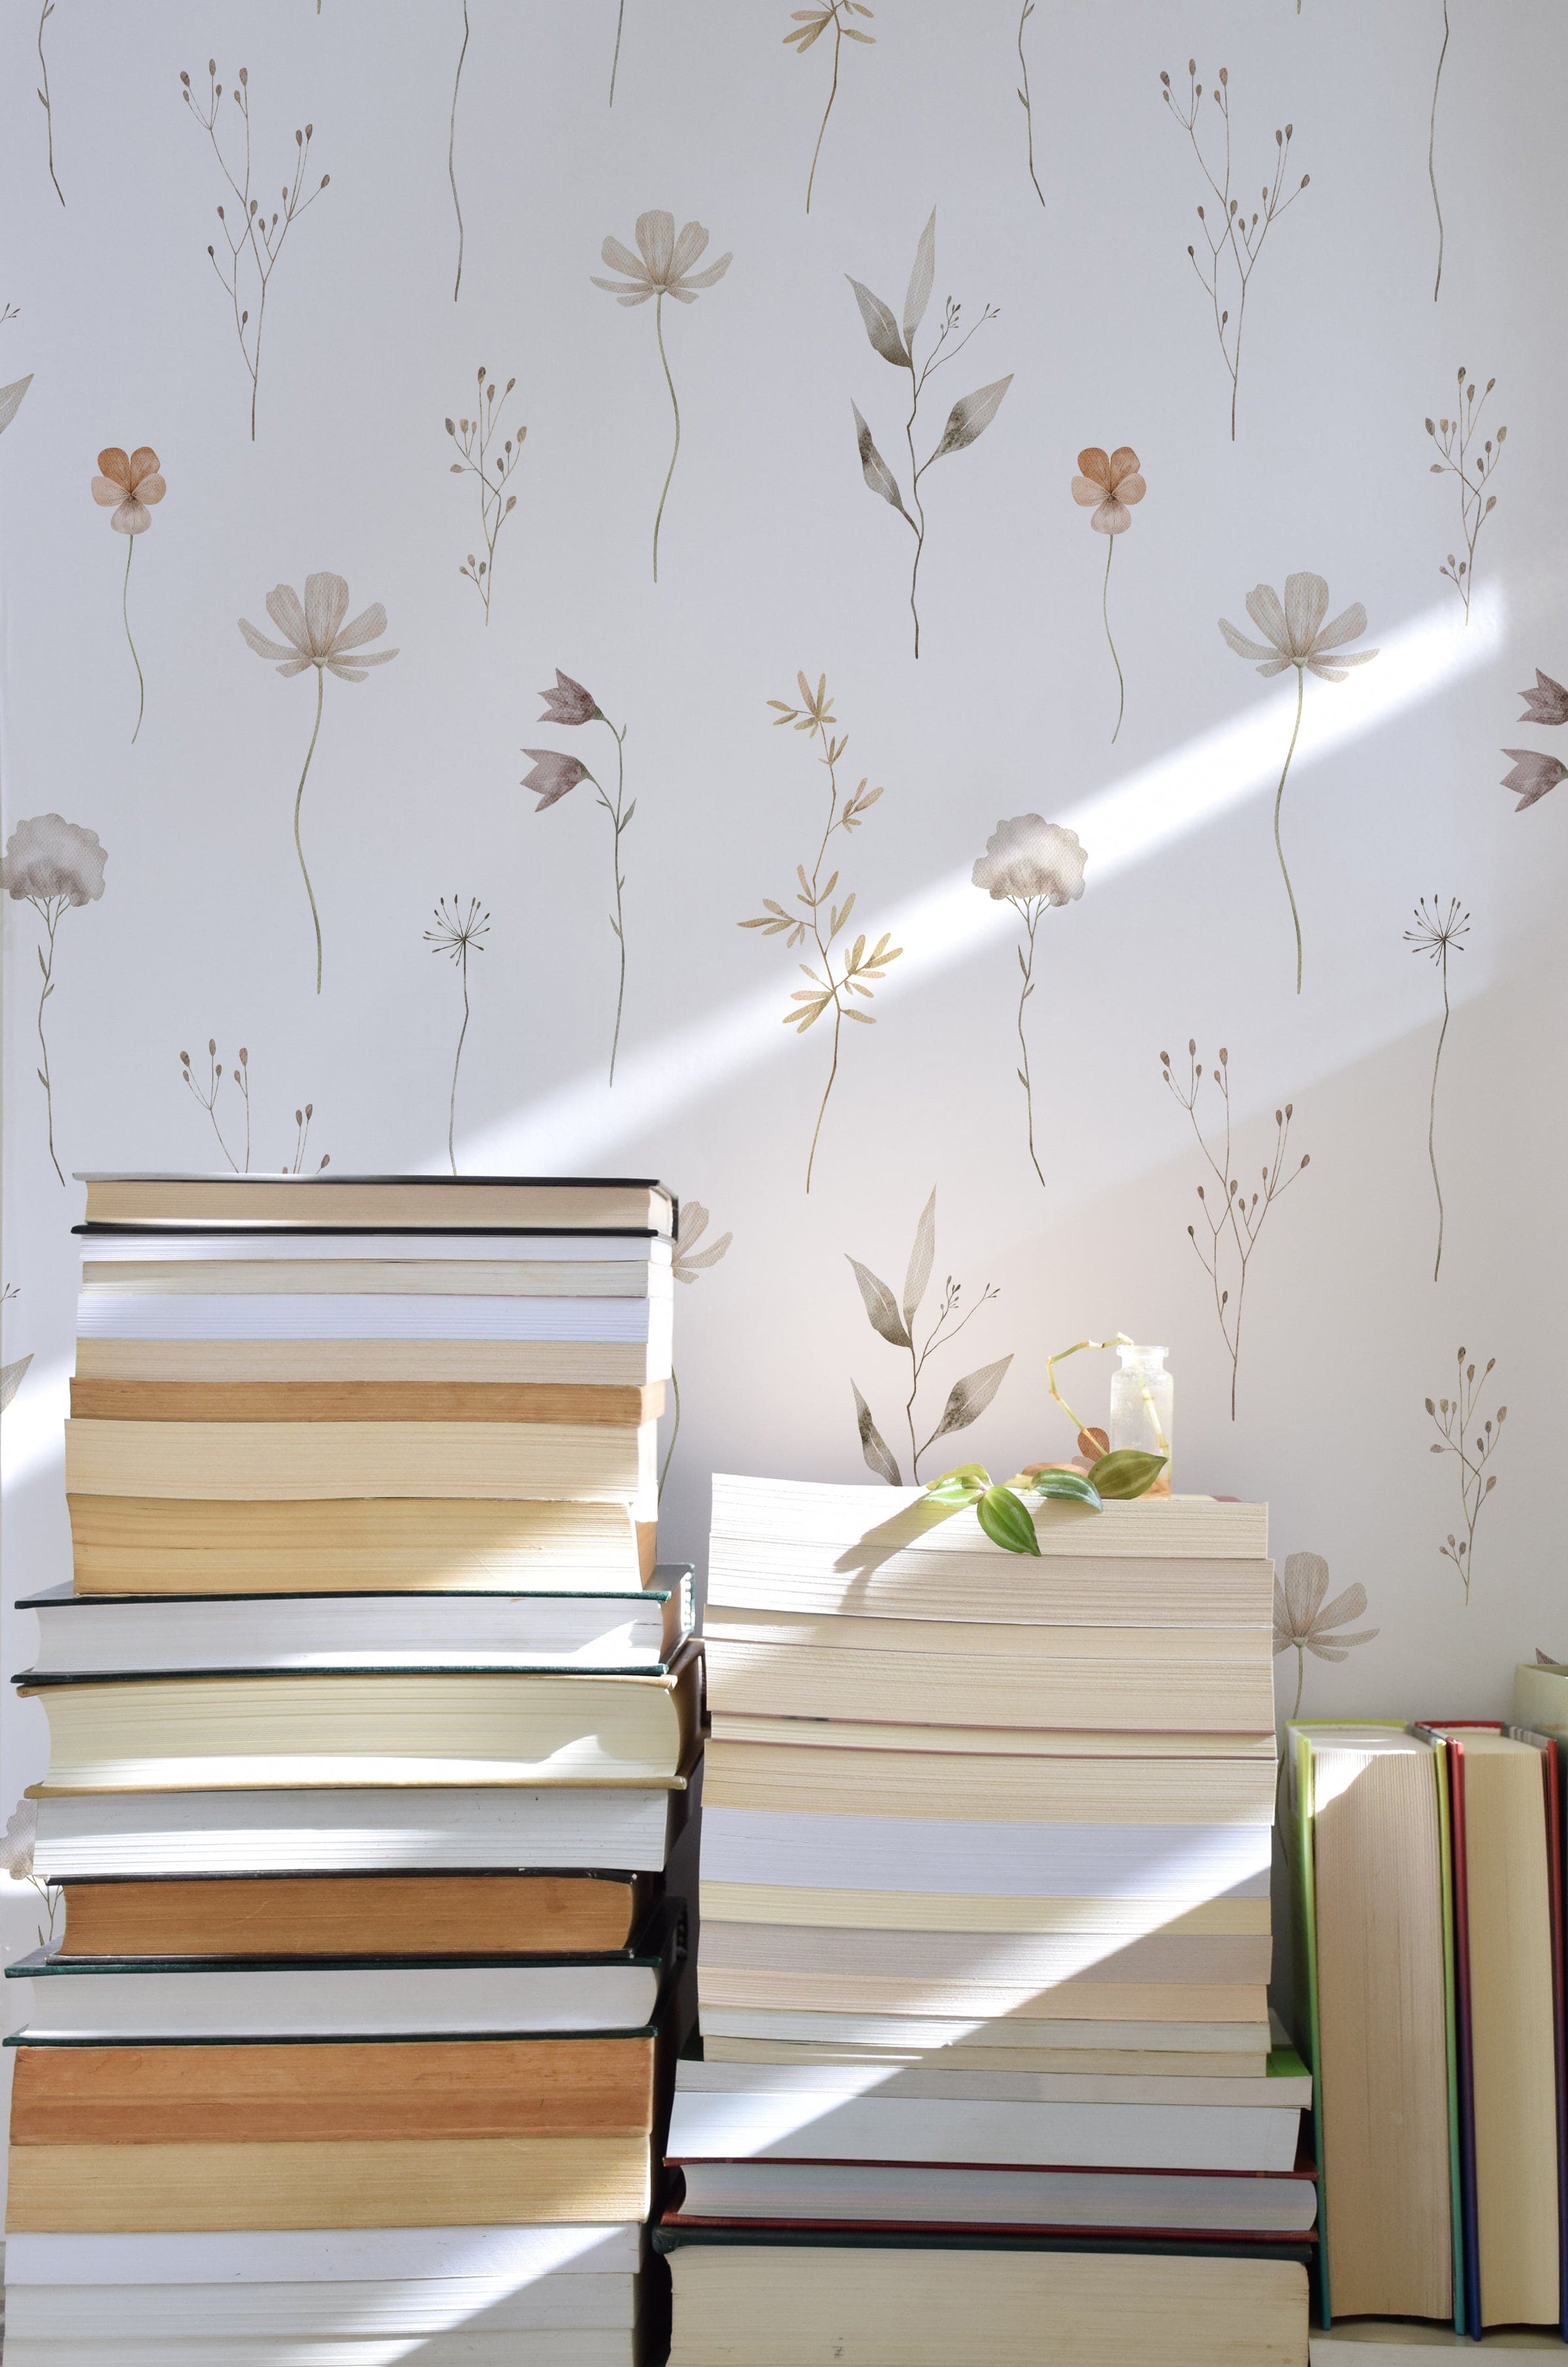 A serene composition of stacked books bathed in natural sunlight against a backdrop of 'Muted Floral Wallpaper', featuring delicate hand-drawn flowers and sprigs in soft neutrals that cast gentle shadows on the wall.